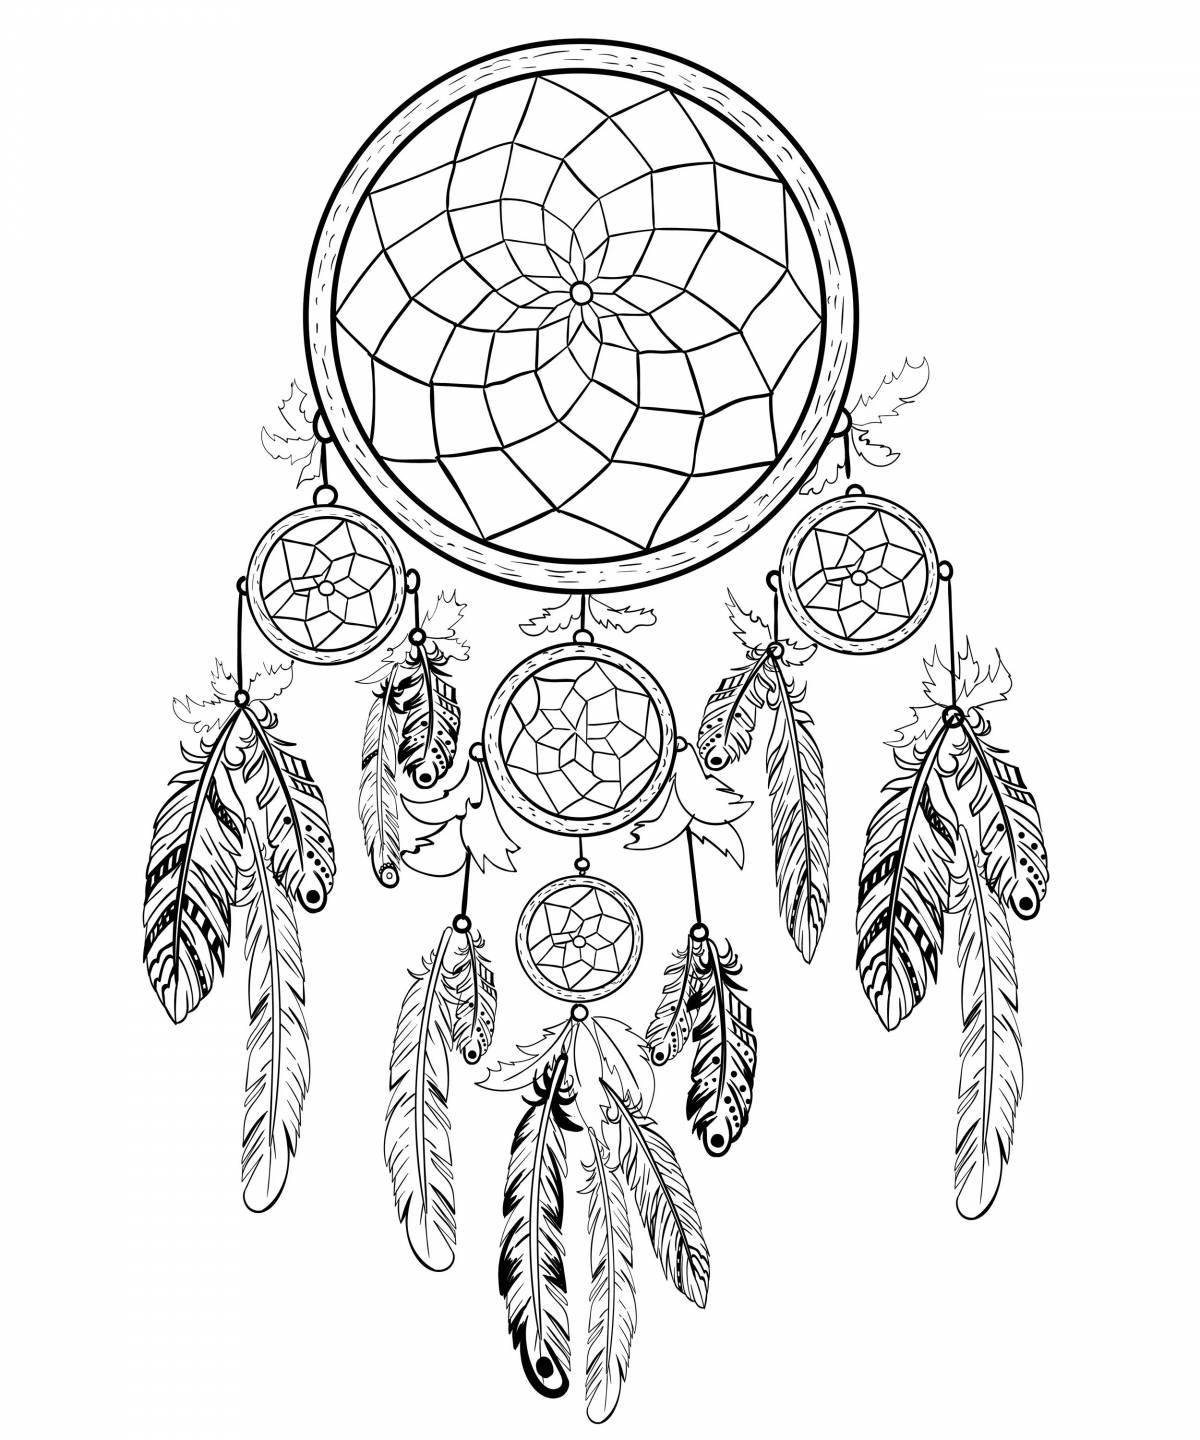 Serene dreamcatcher coloring page